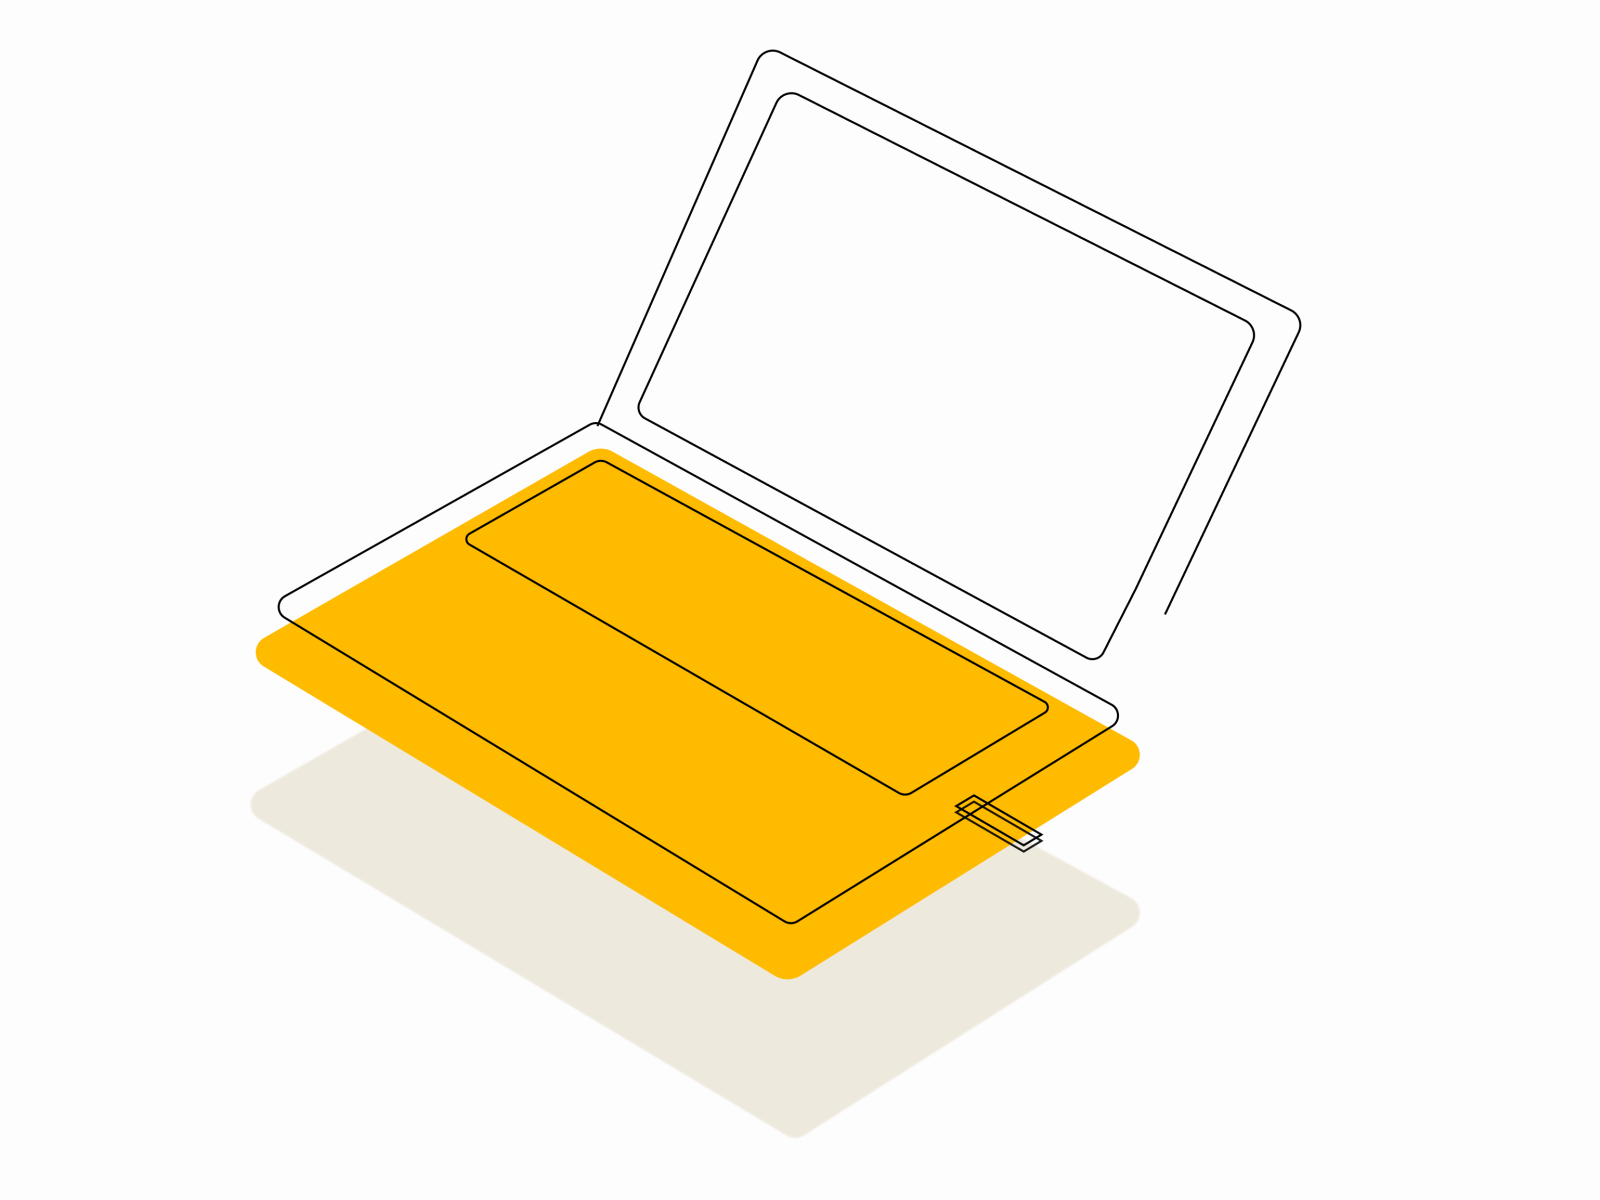 Laptop icon by Dylan Stephenson on Dribbble